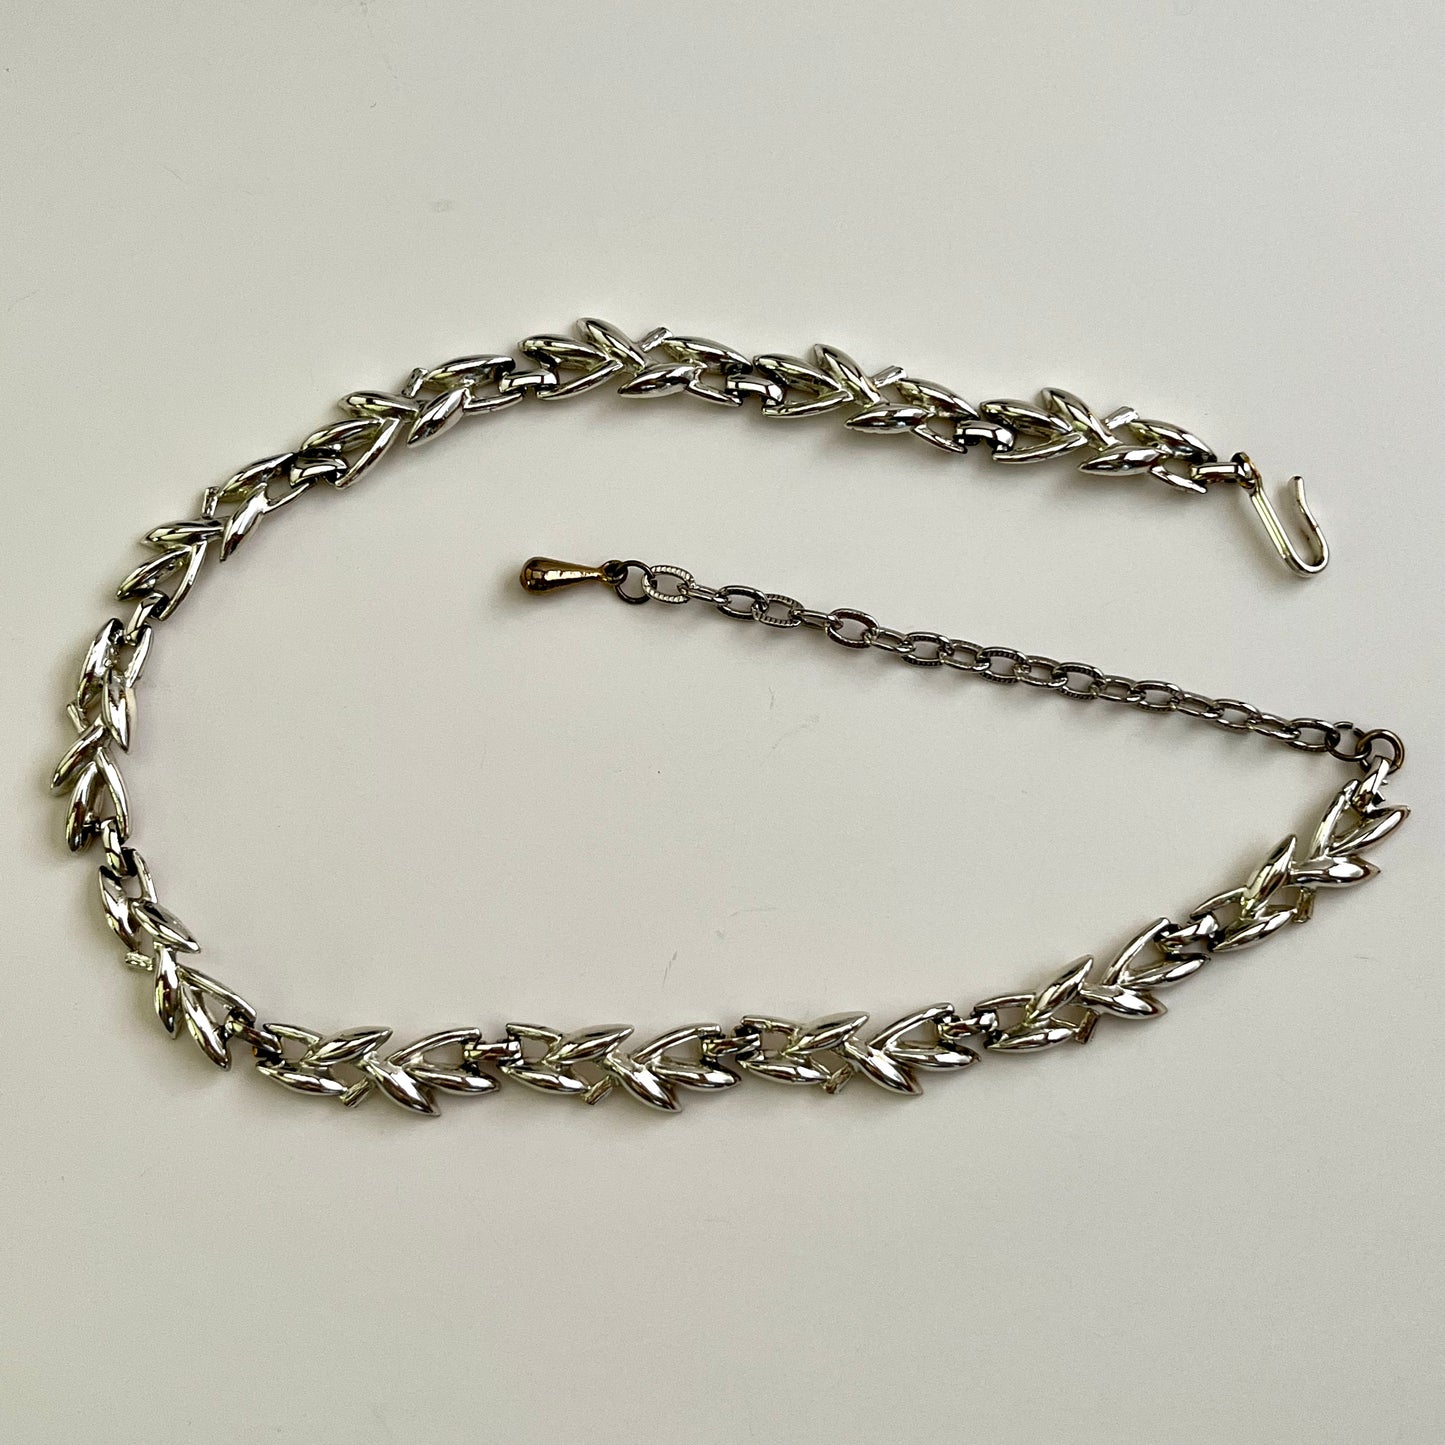 Late 50s/ Early 60s Silver-Tone Choker Necklace